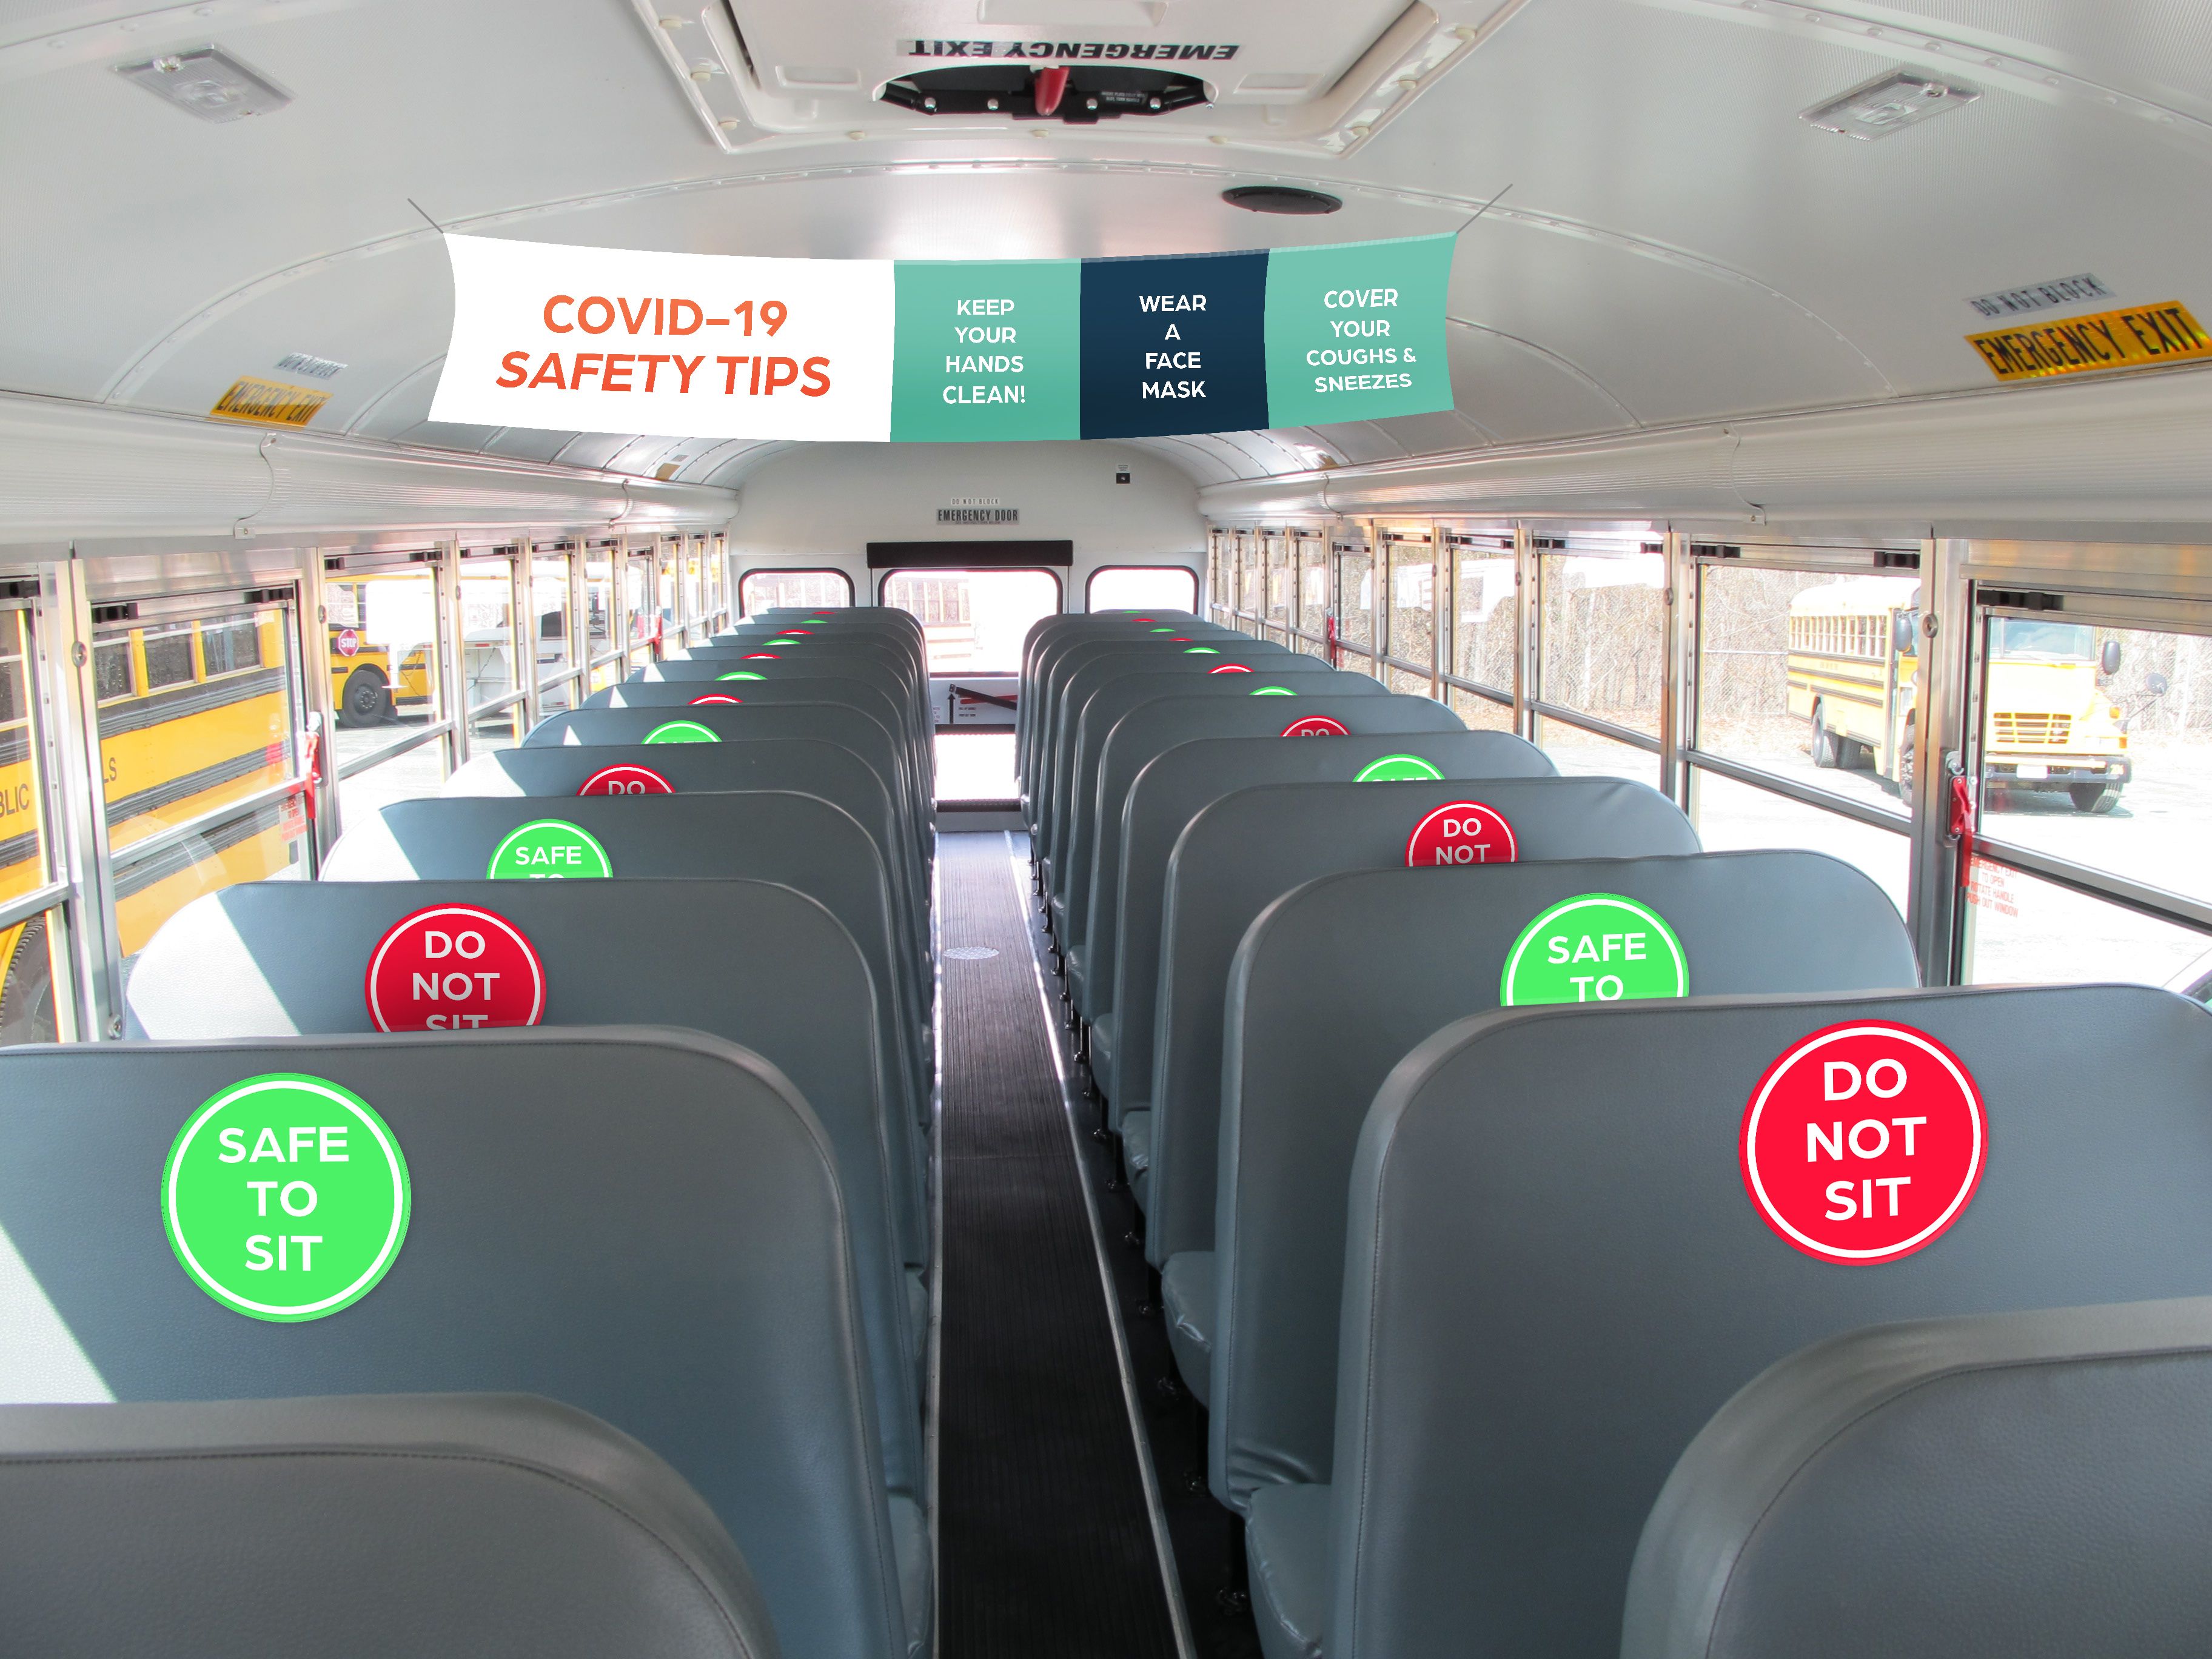 School Bus Interior with Social Distancing Graphics and Hygiene Signs